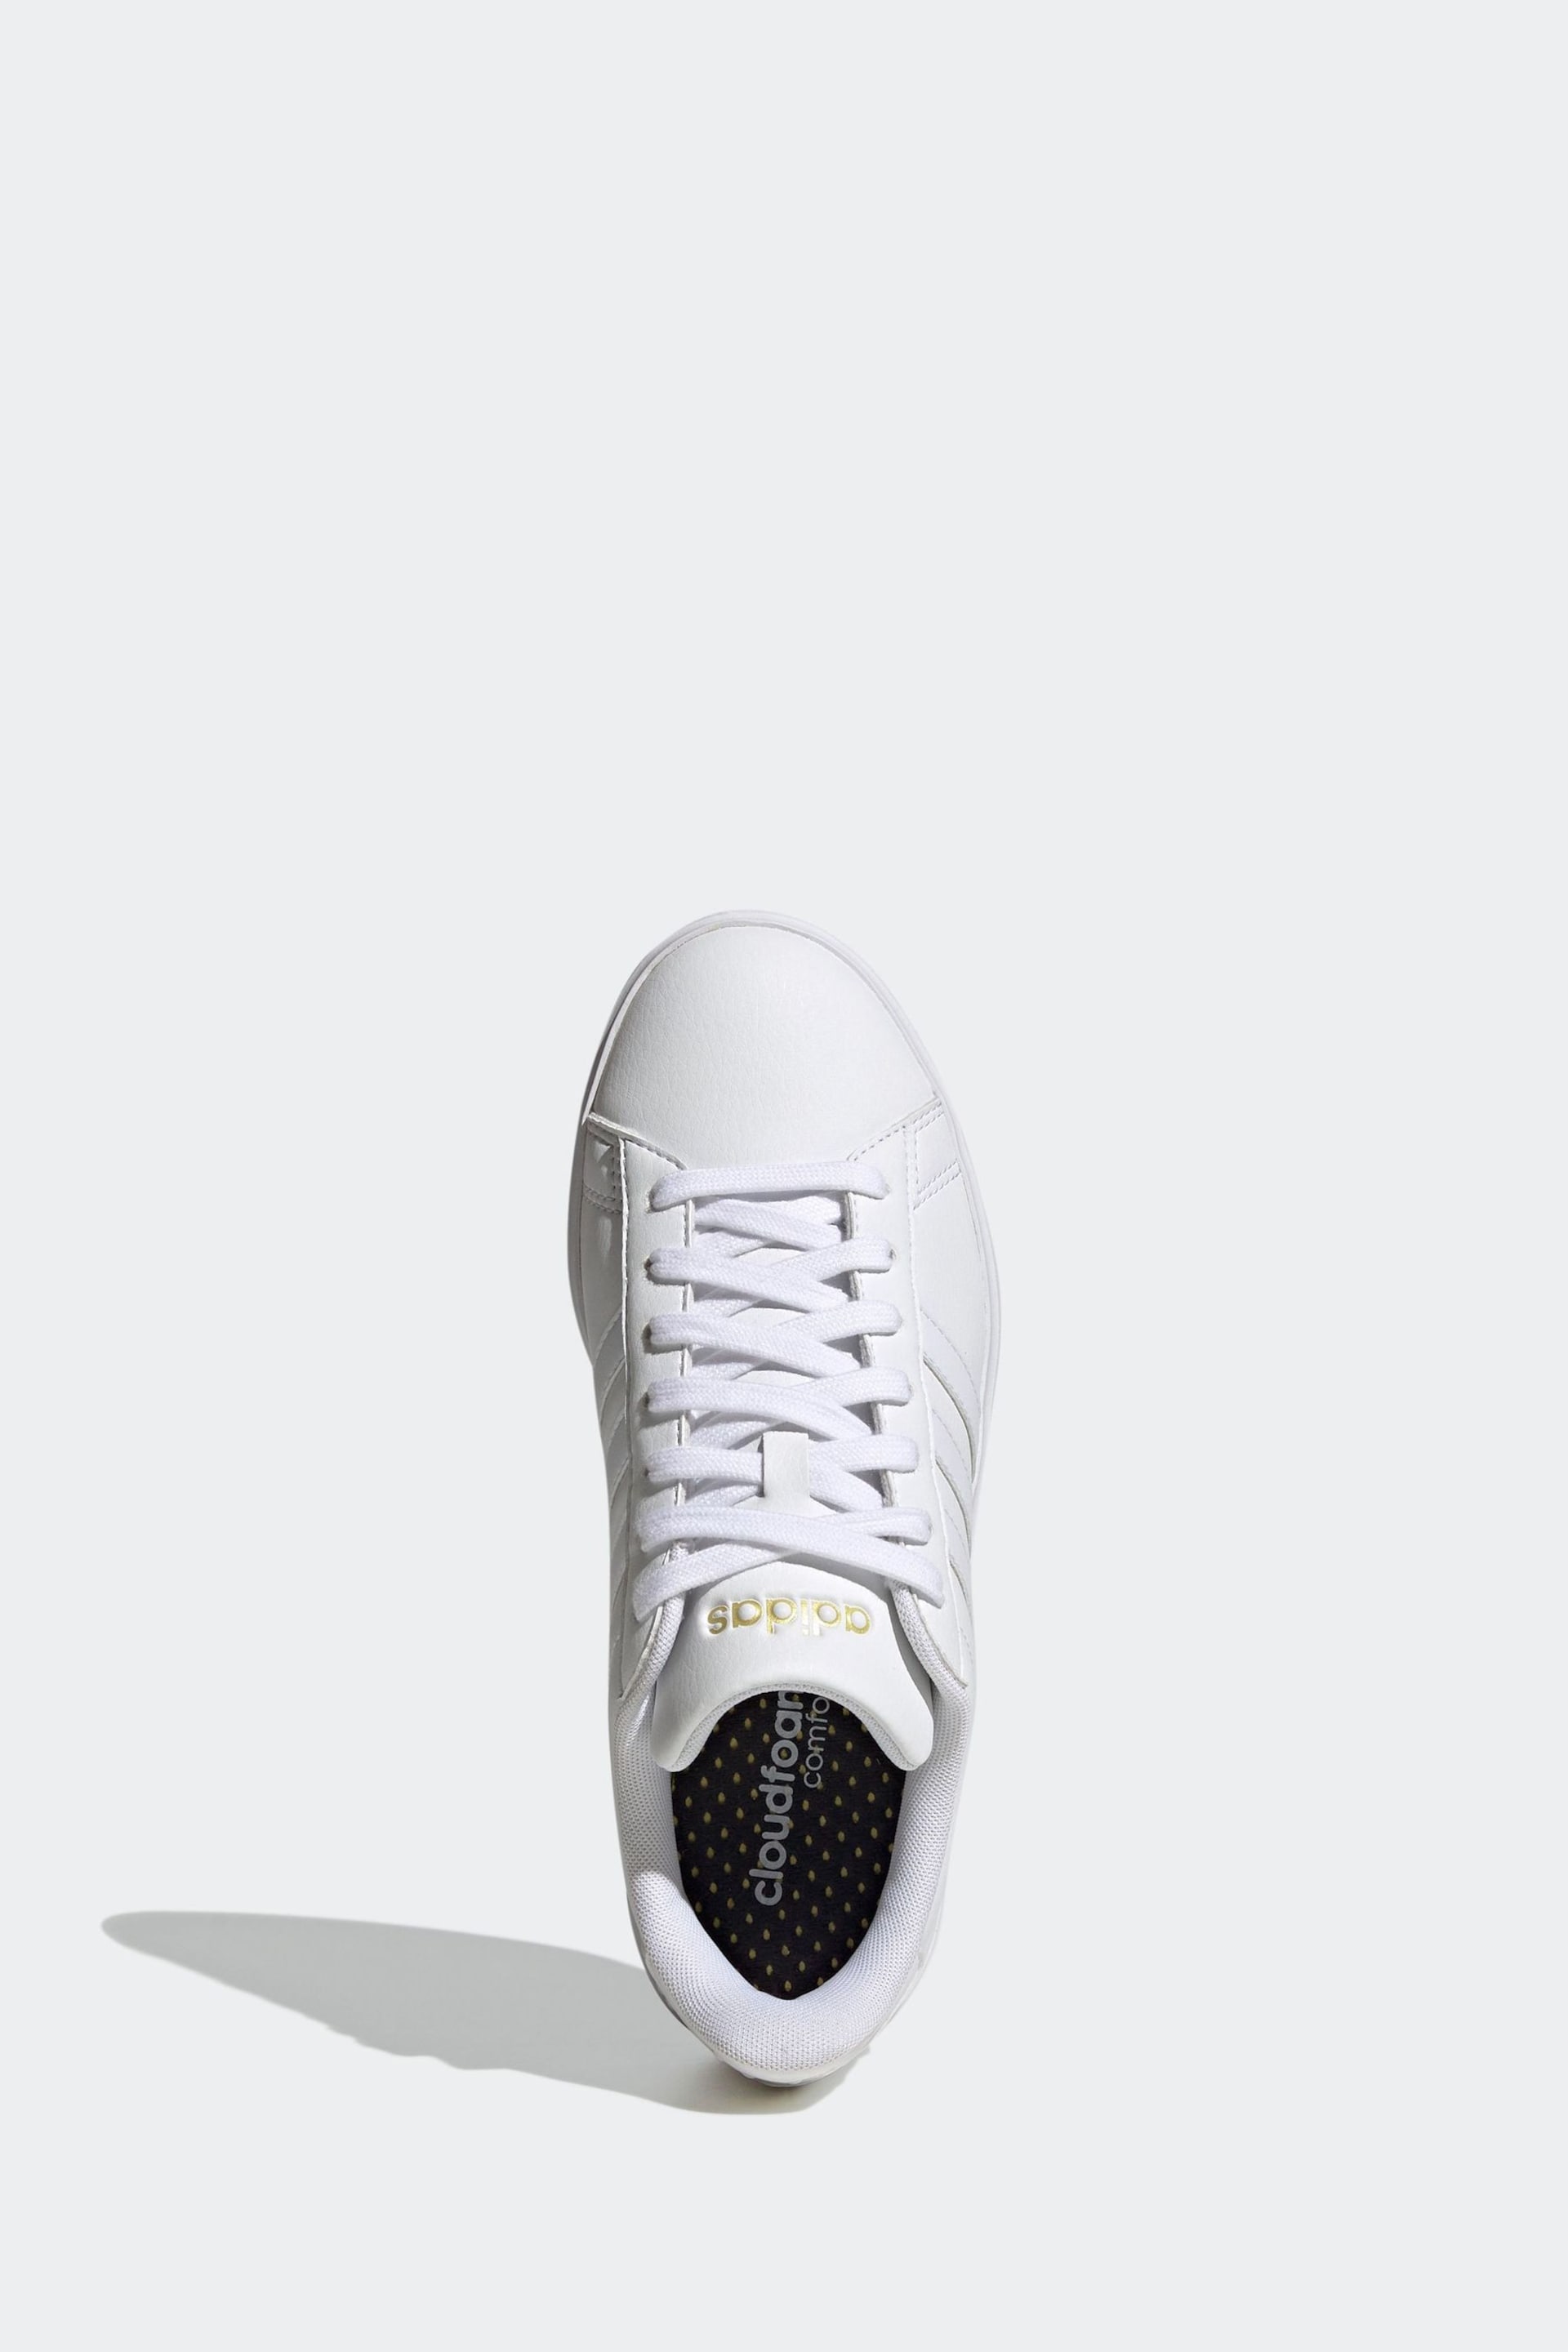 adidas White Grand Court Cloudfoam Lifestyle Comfort Trainers - Image 6 of 9